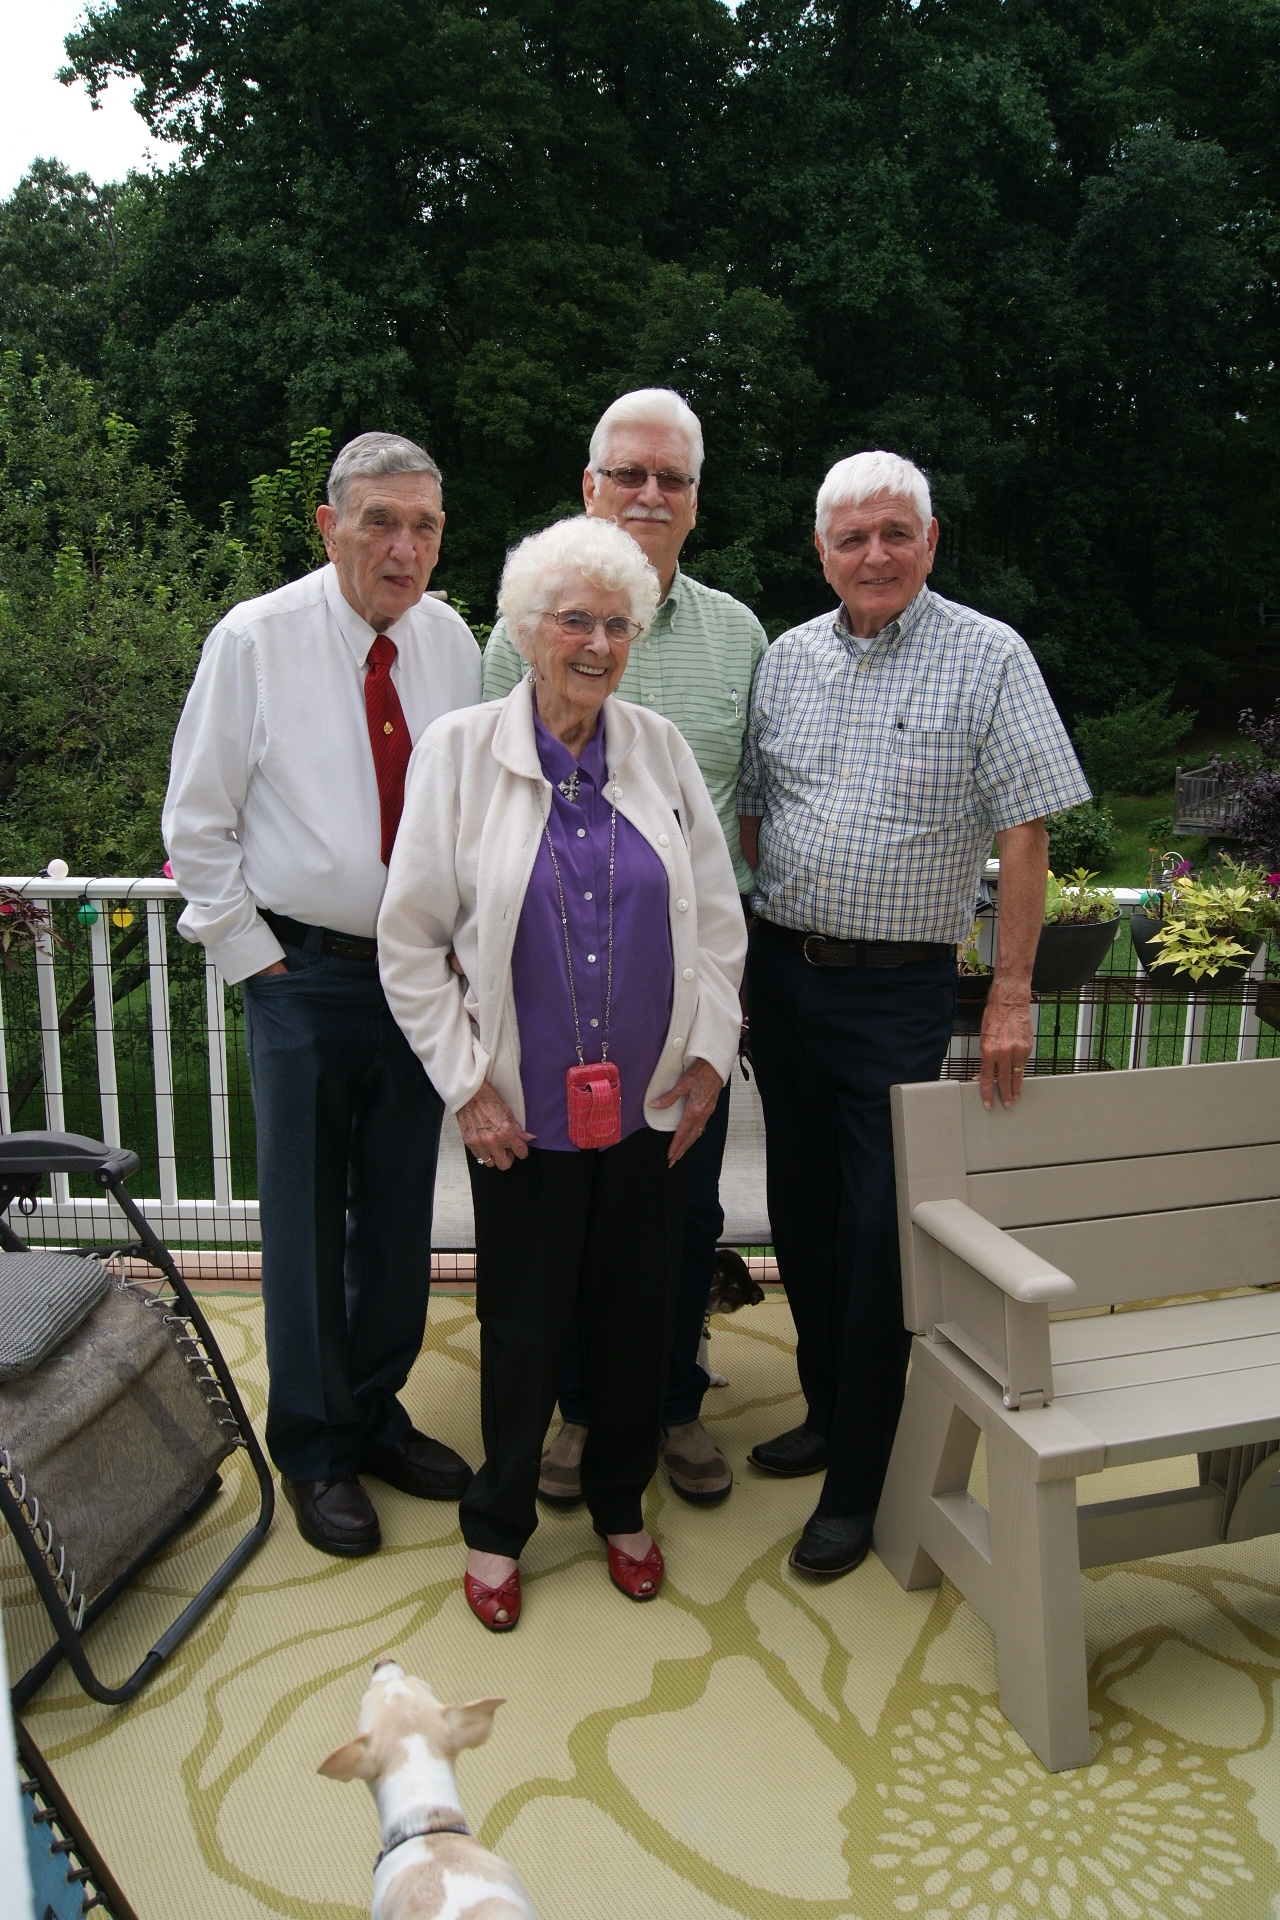 Don, Jerry, Lyn, and Grace - August 2015